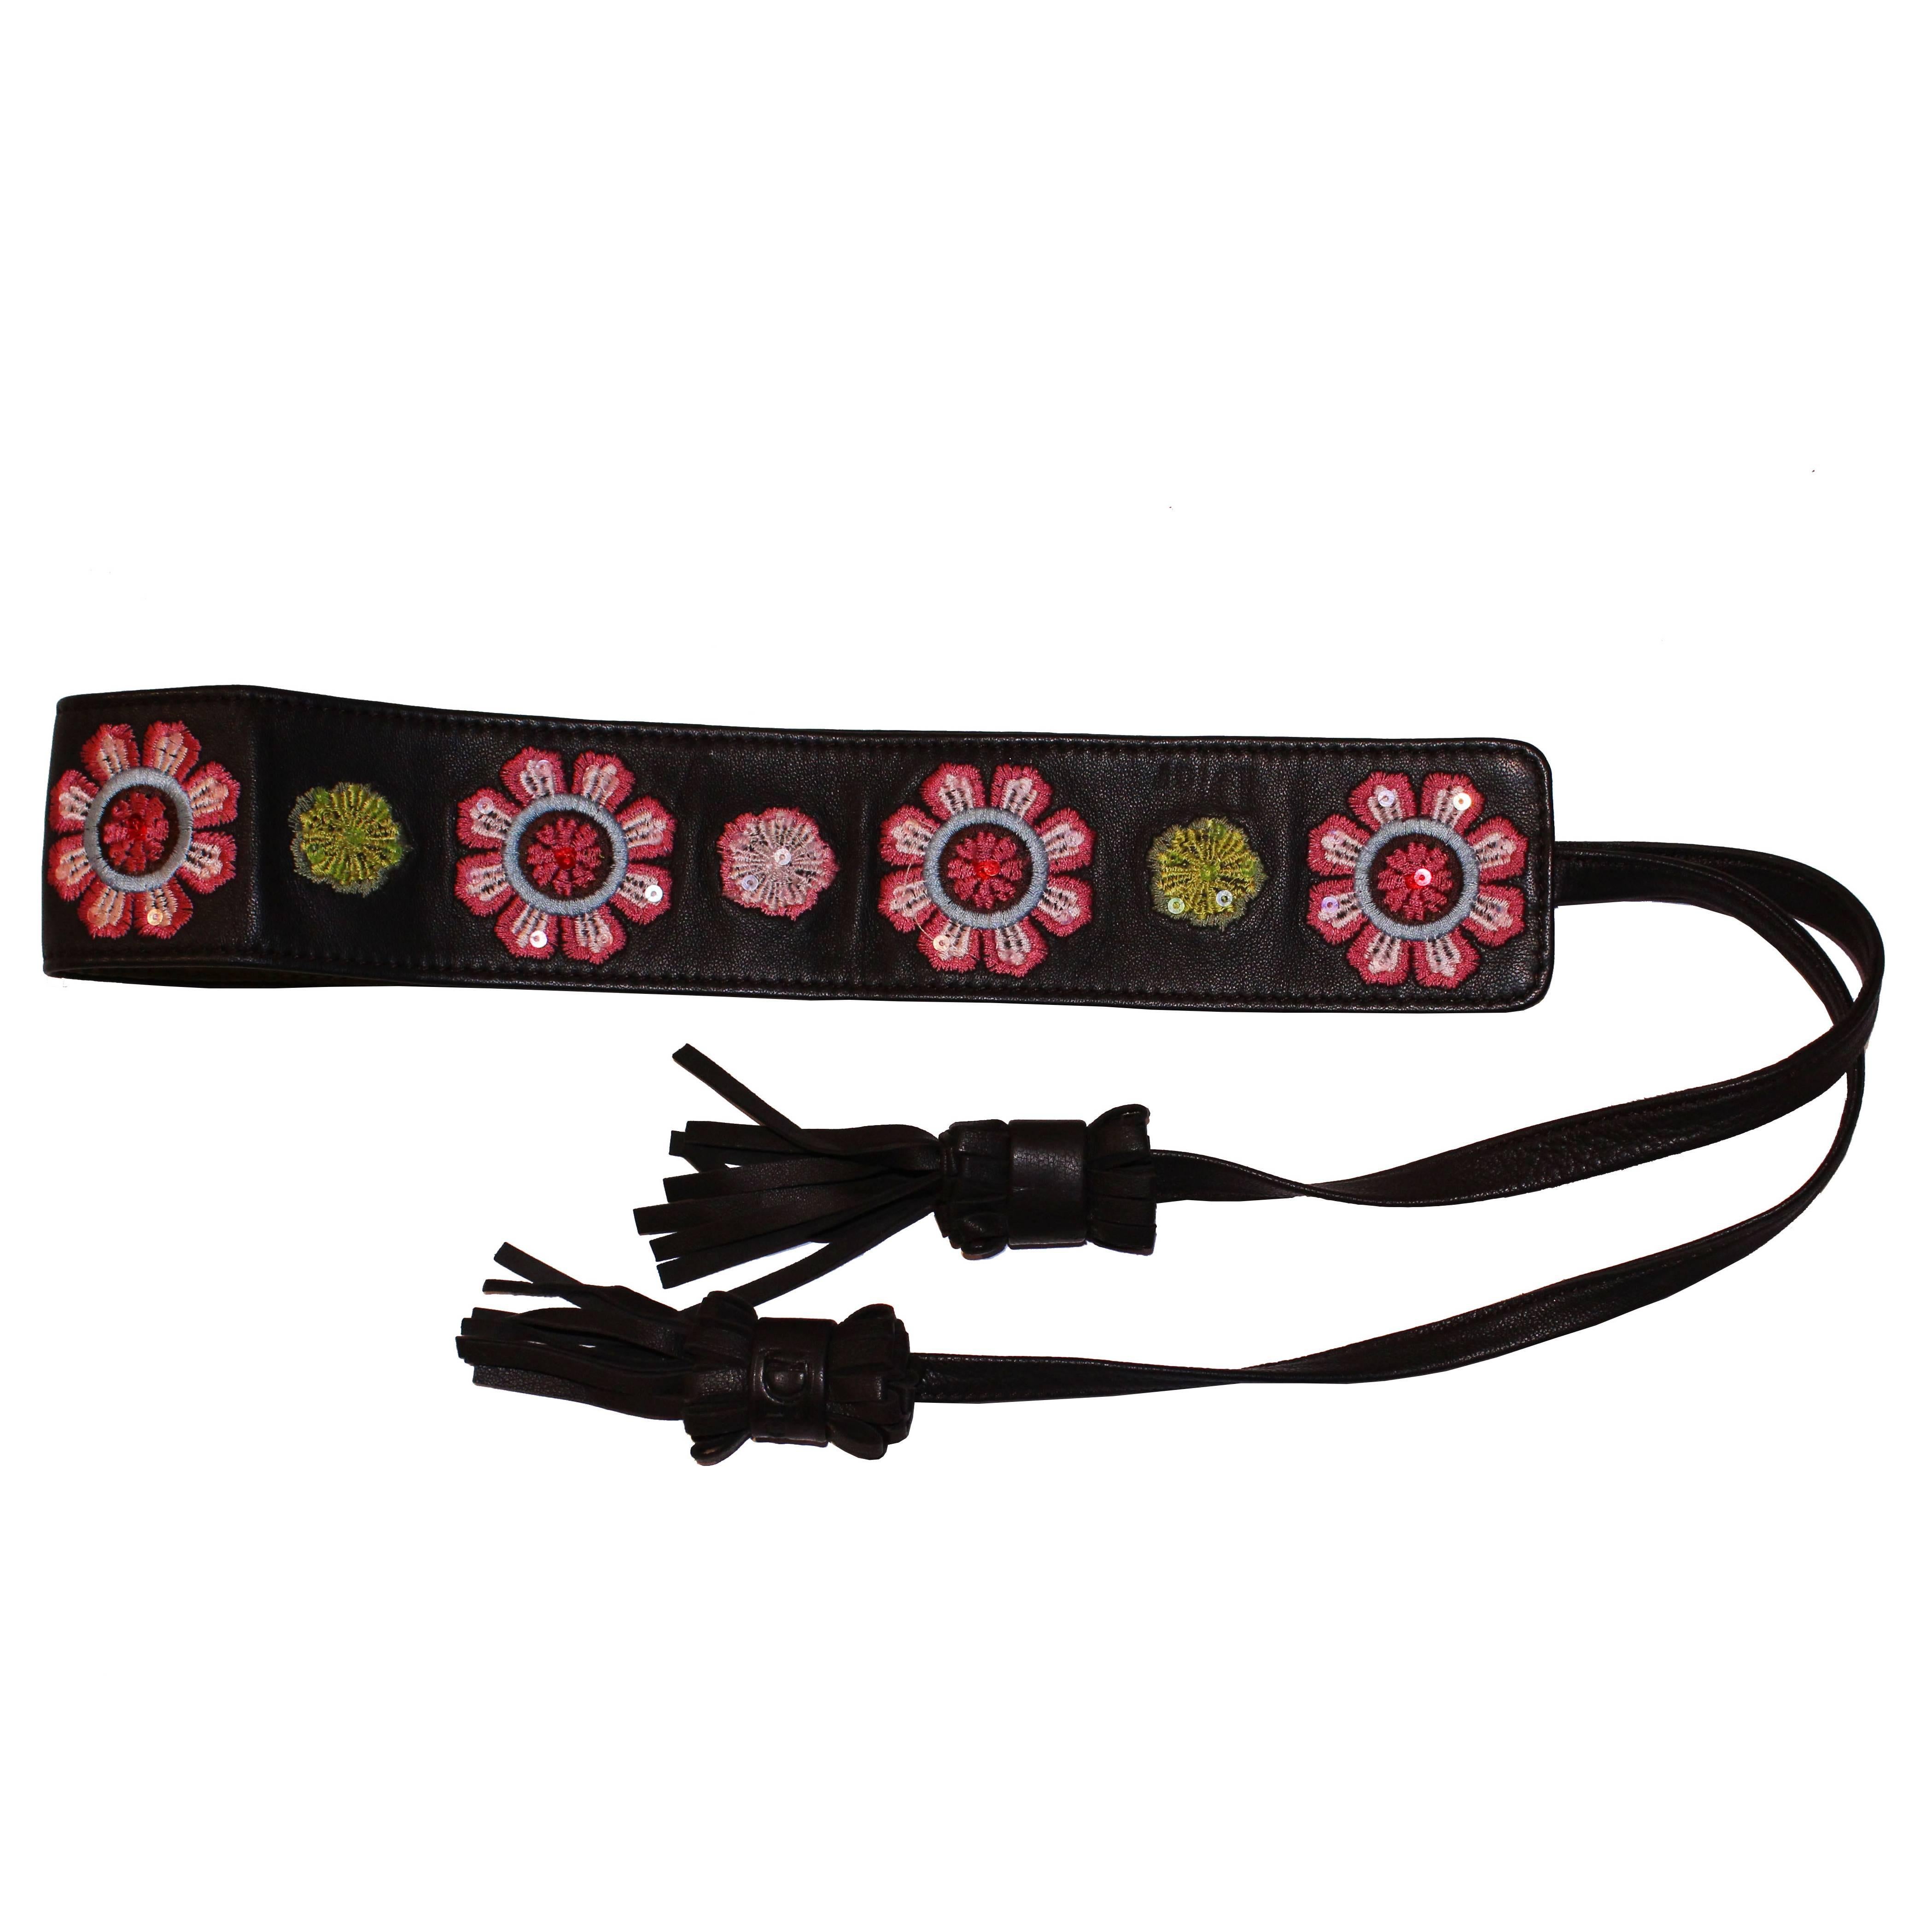 Embroidered Leather belt by Dior with Tassle Ties